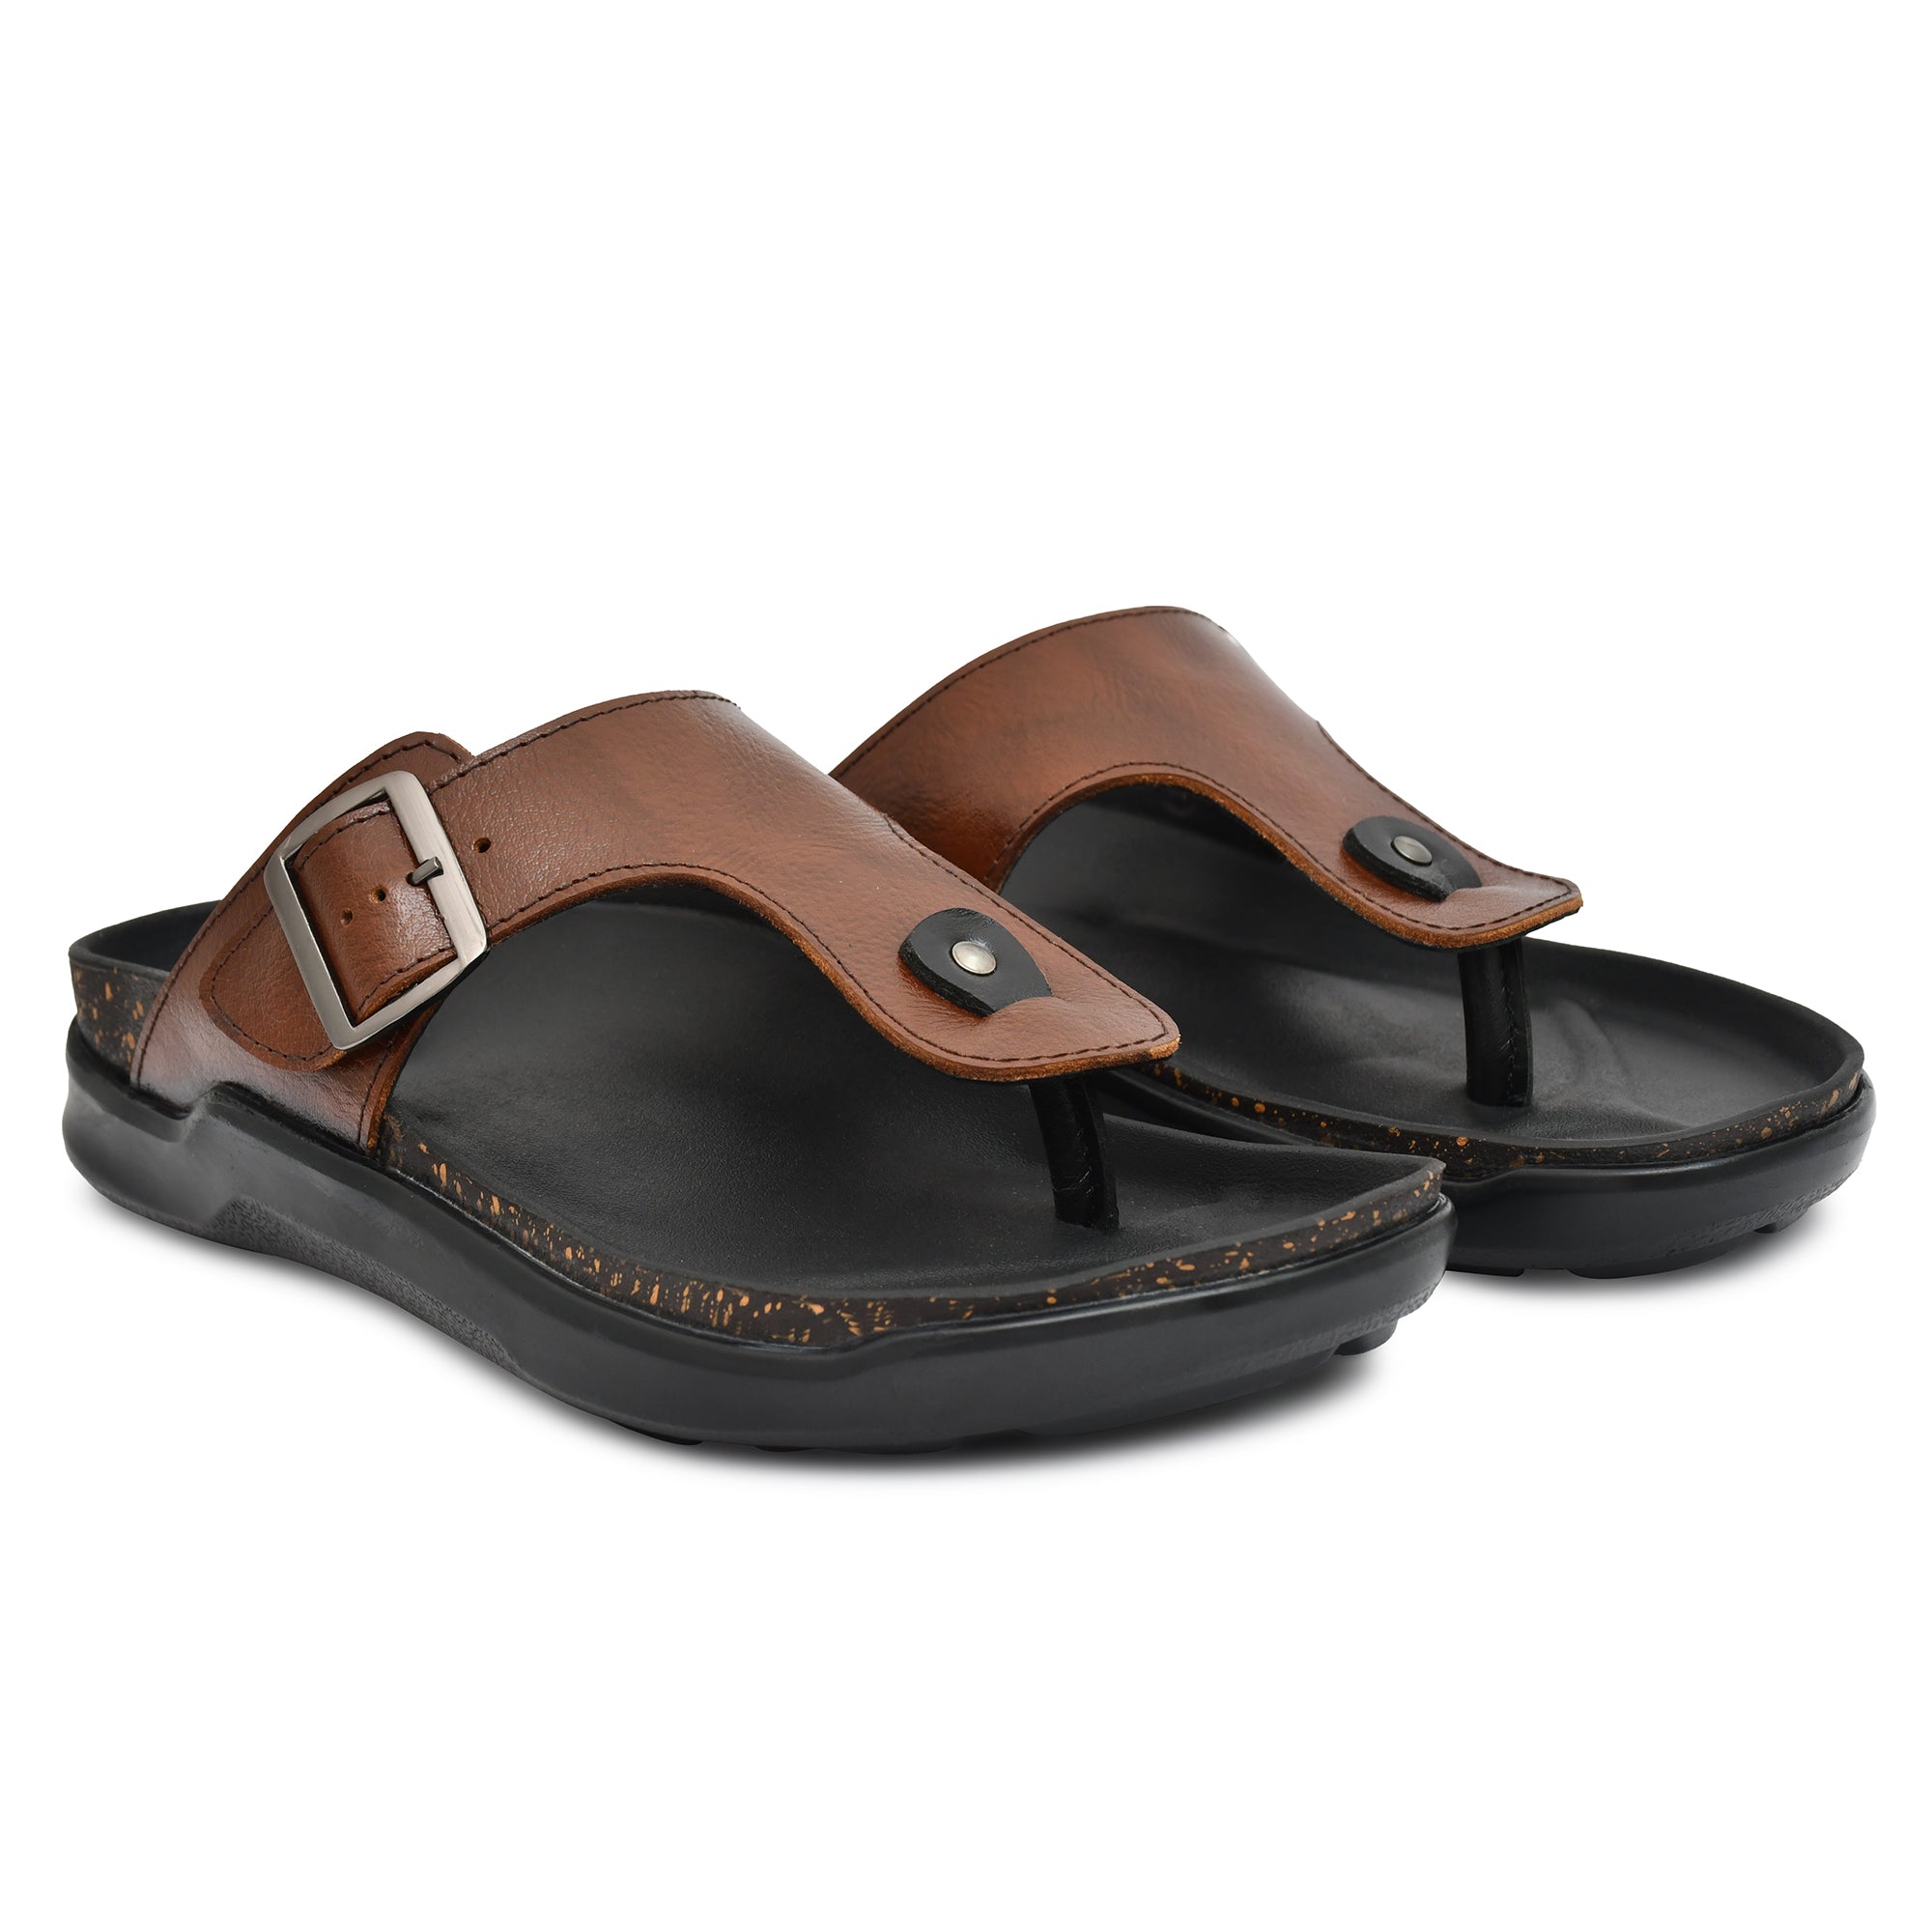 Brown Leather Slipper for men's By Country Maddox